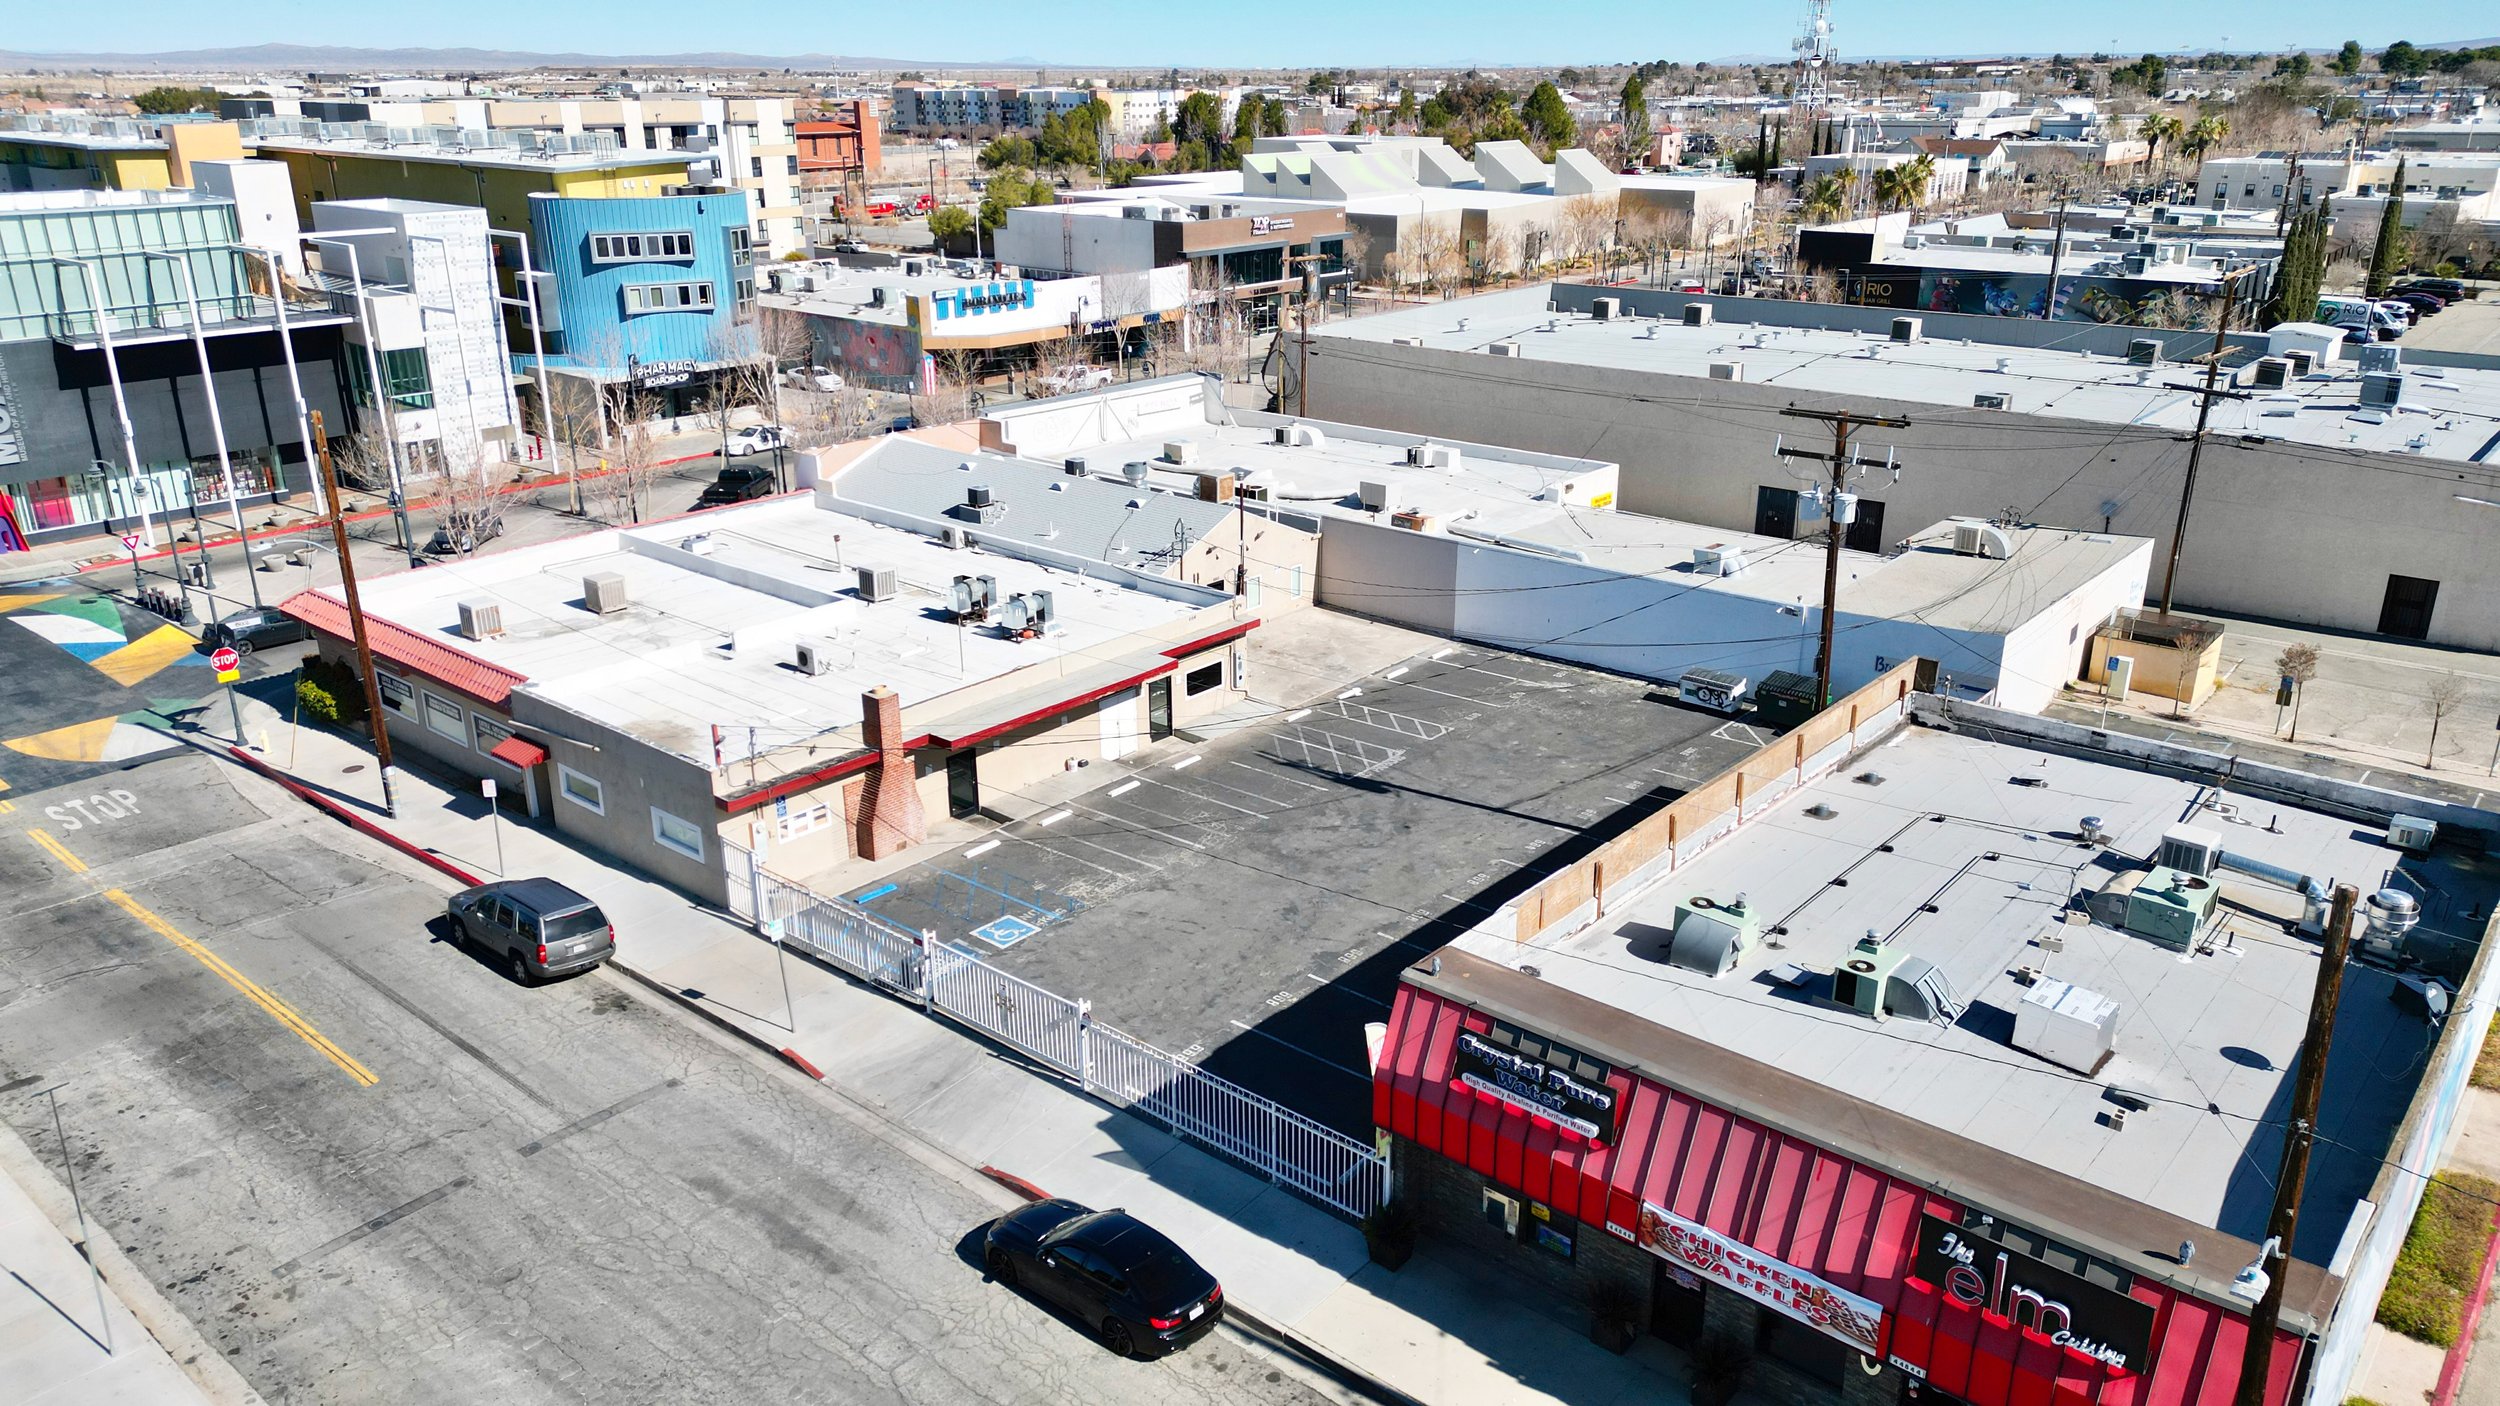 Aerial view of red eatery, cars, streets, with residential backdrop under clear skies.